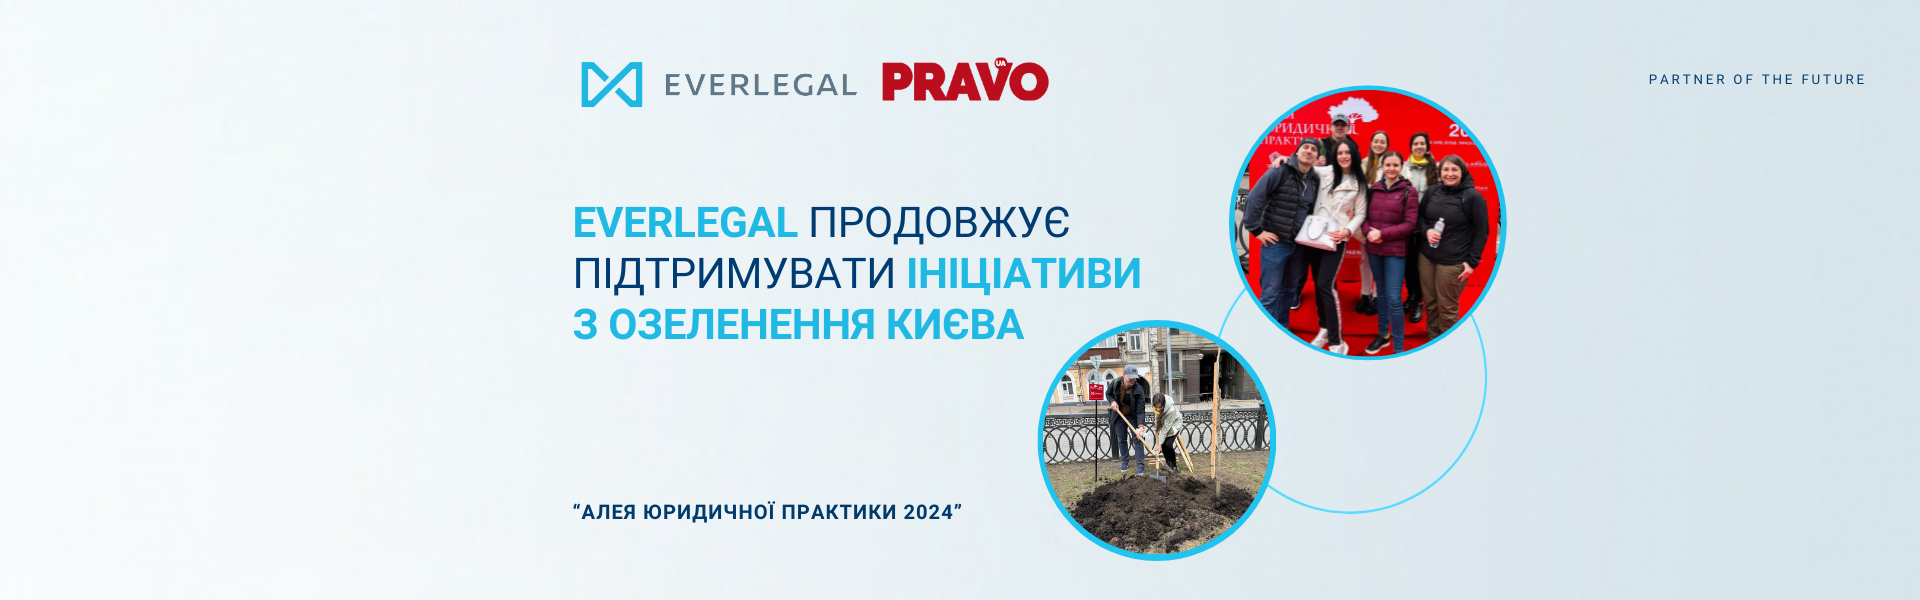 EVERLEGAL continues to support greening initiatives in Kyiv